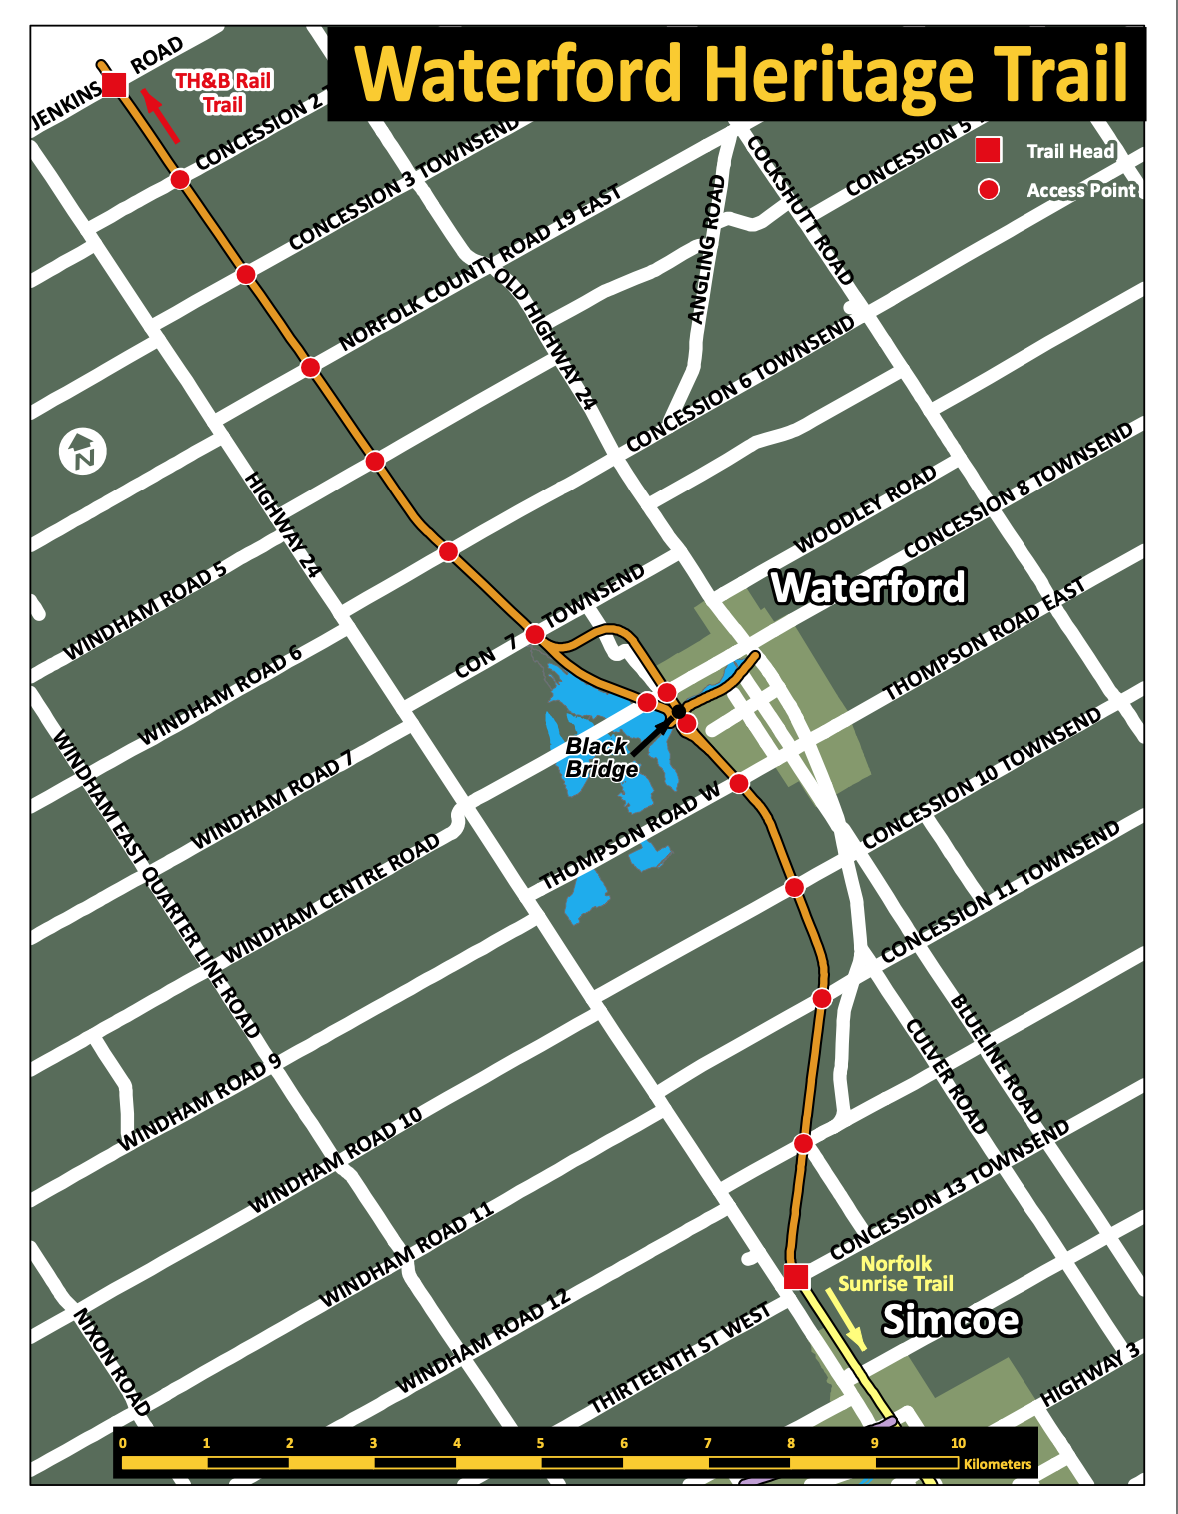 Waterford Heritage Trail Map